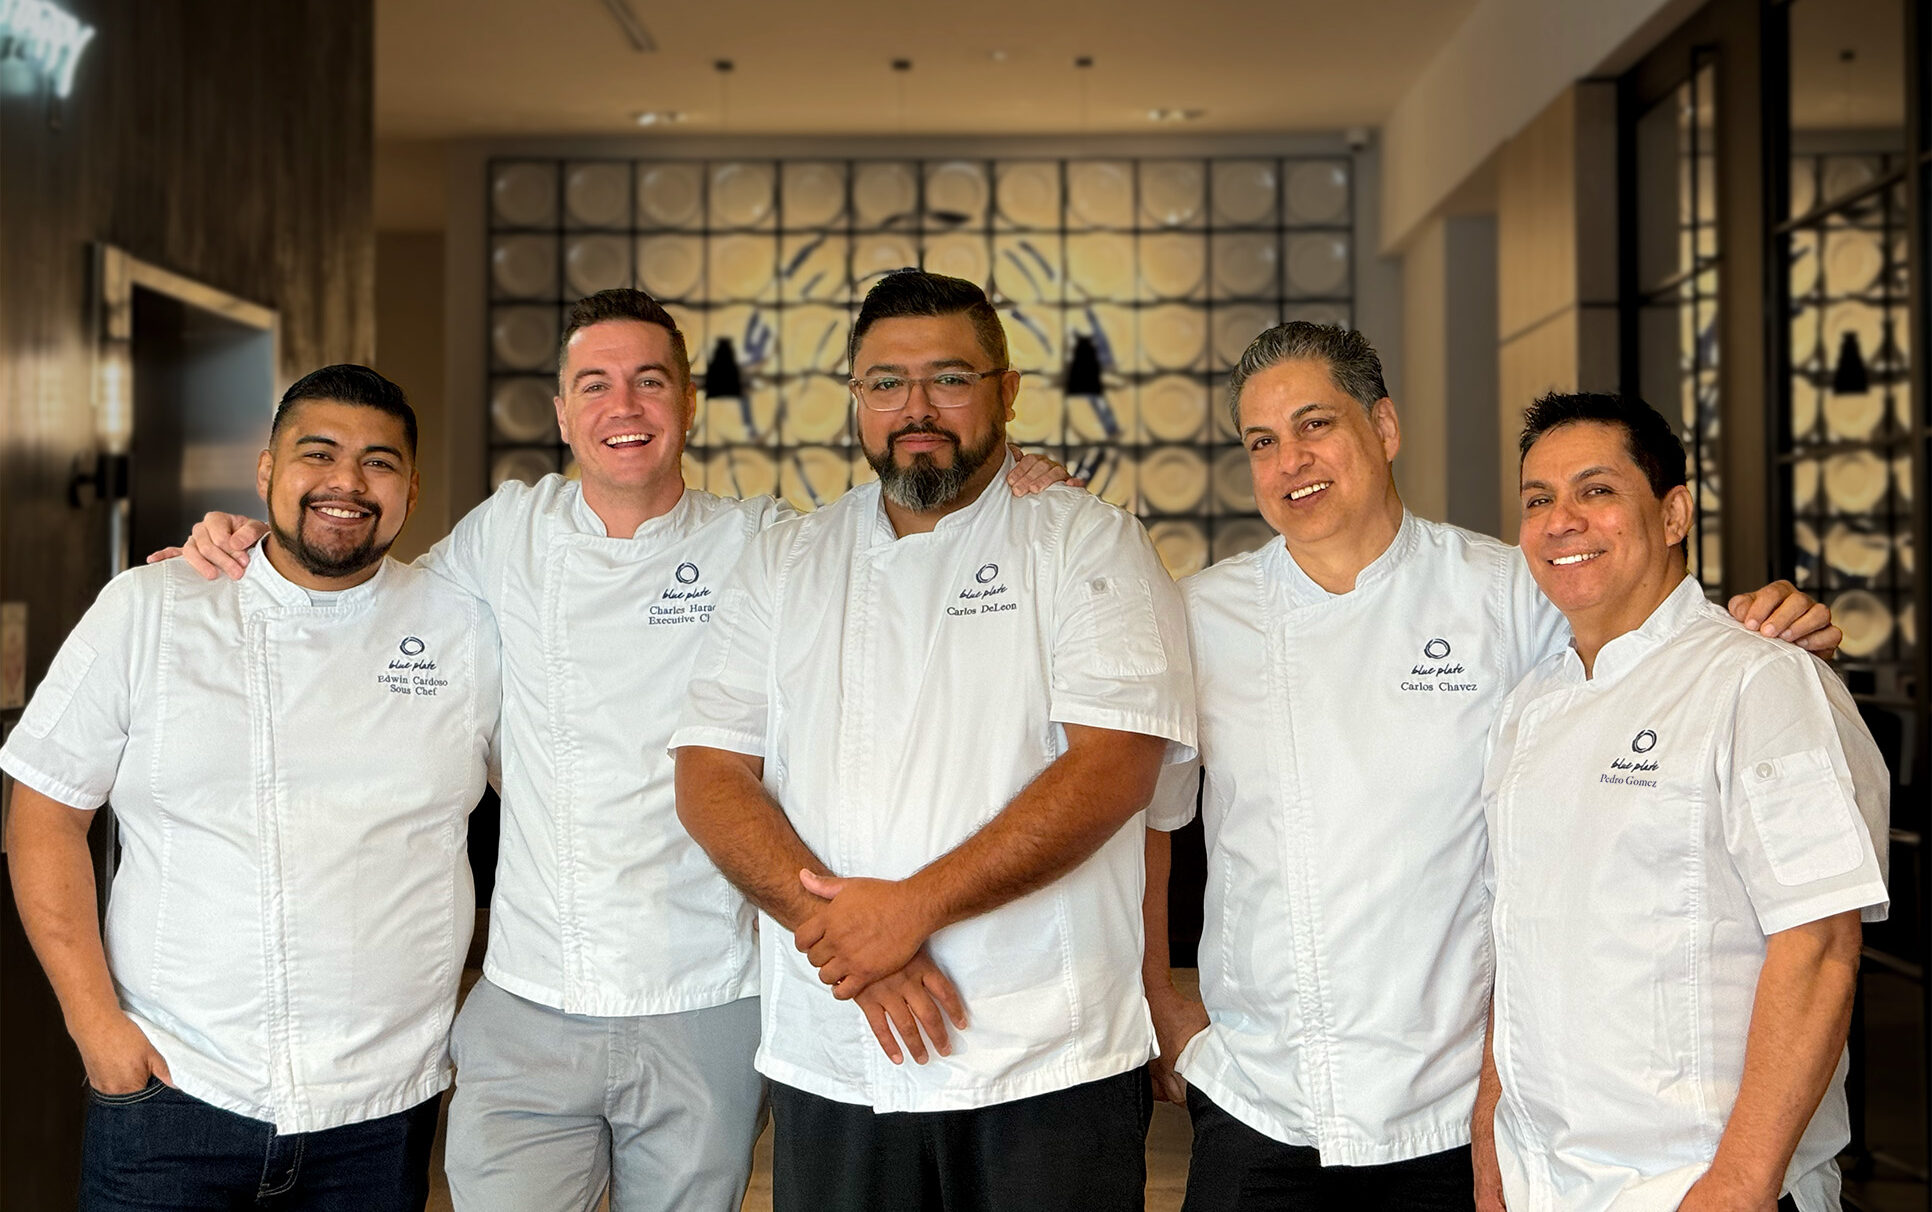 Meet the Culinary Team - Blue Plate's culinary team standing and smiling in in their chef whites.